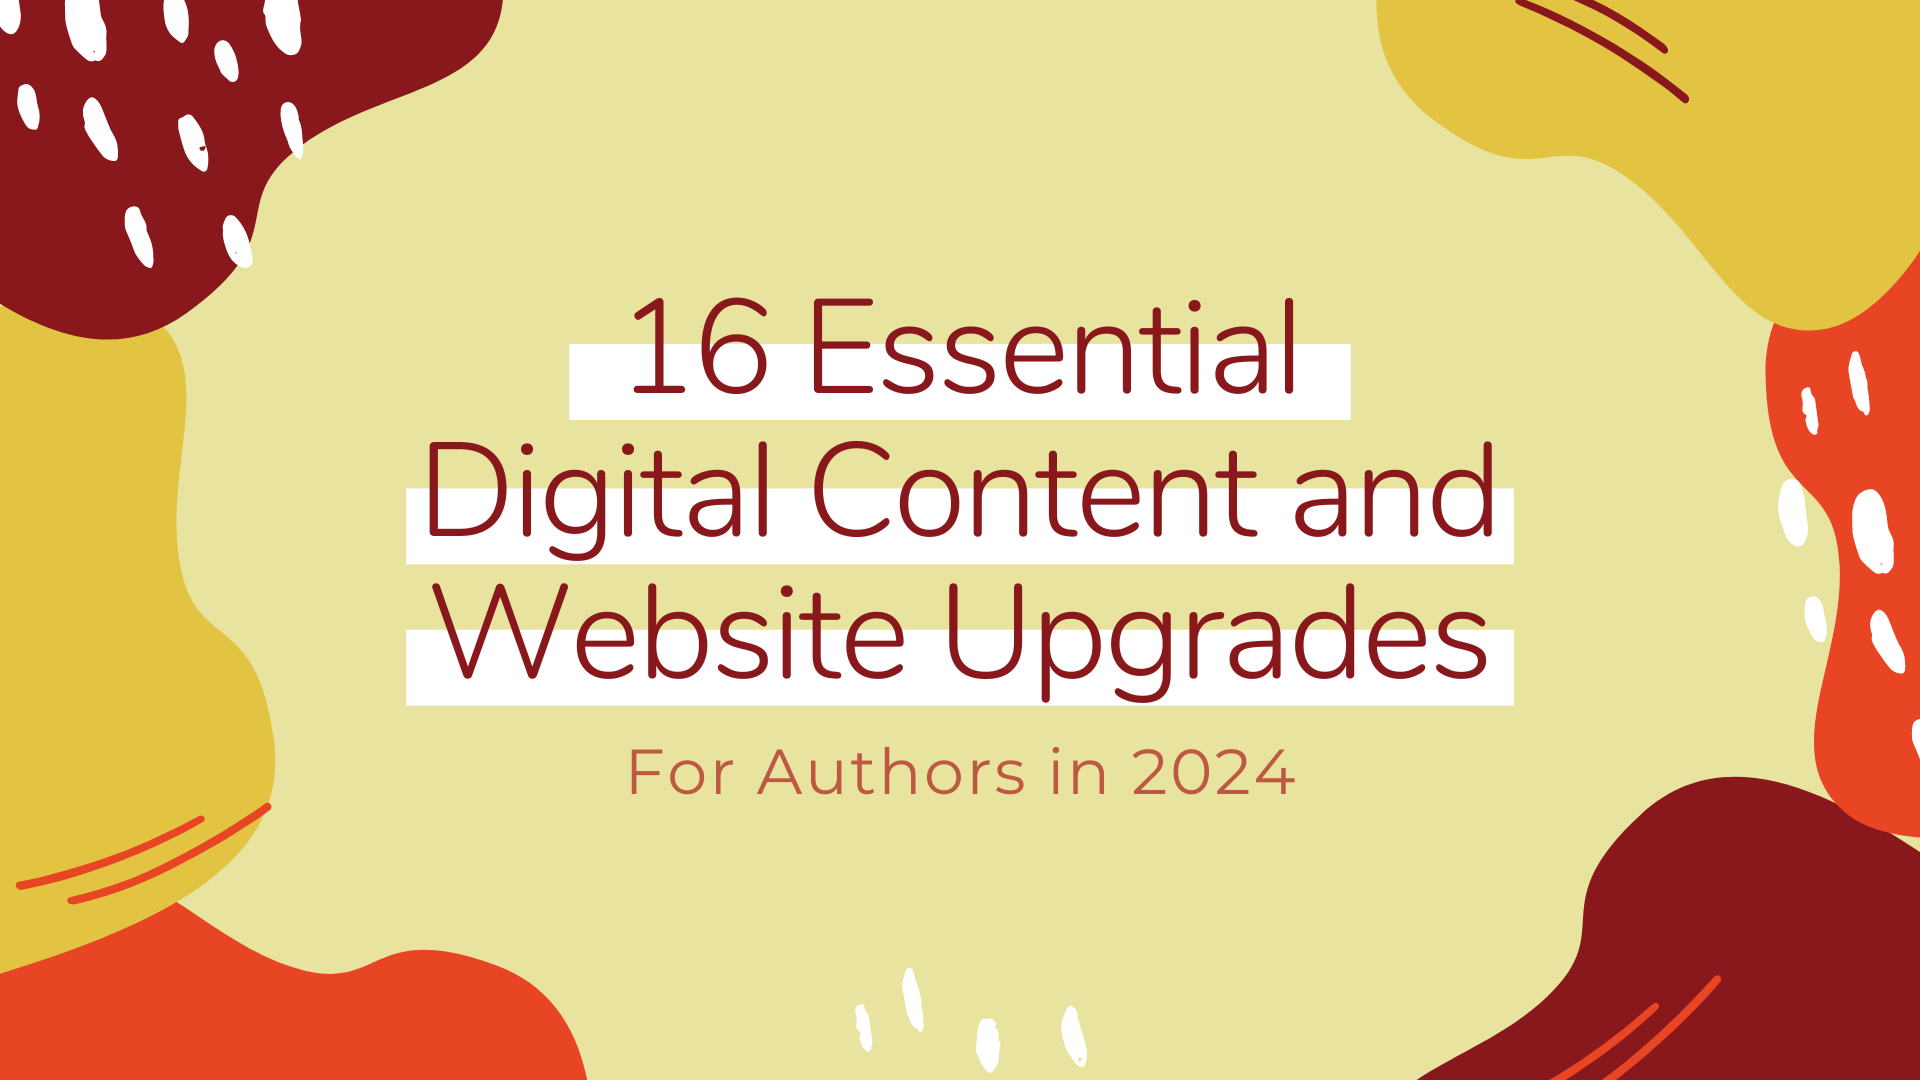 15 Essential Digital Content and Website Upgrades for Authors in 2024